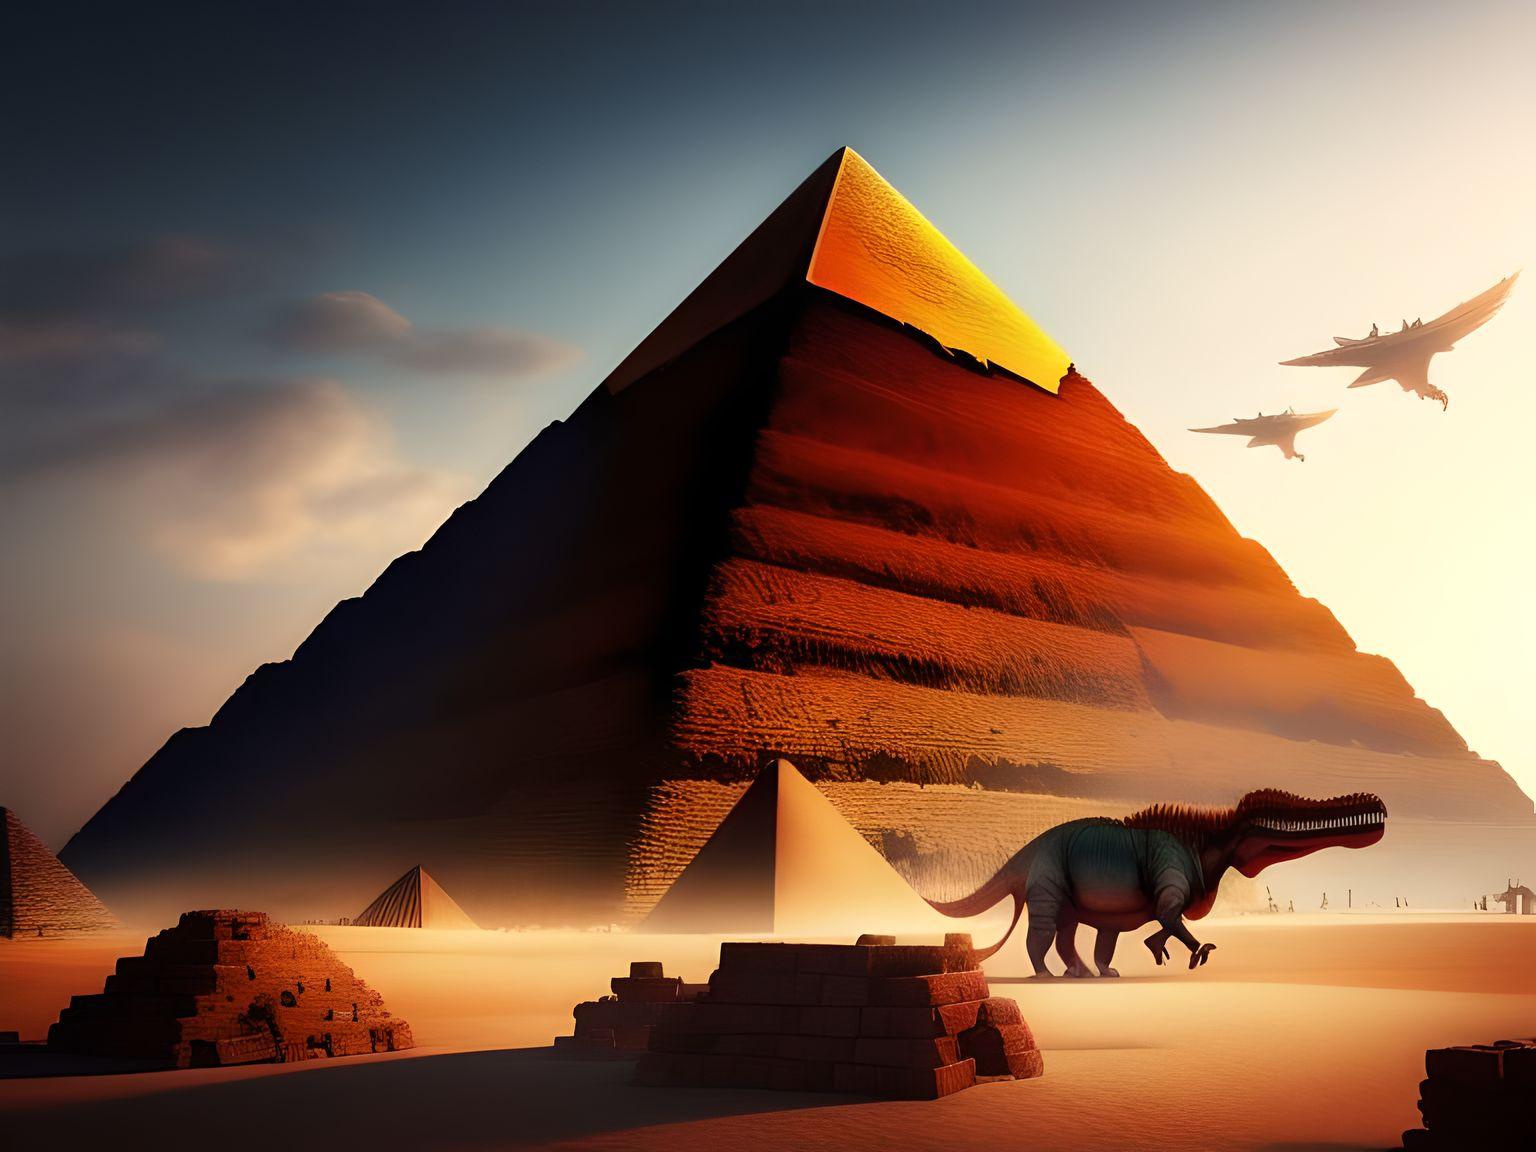 Dinosaurs Helped Build The Pyramids